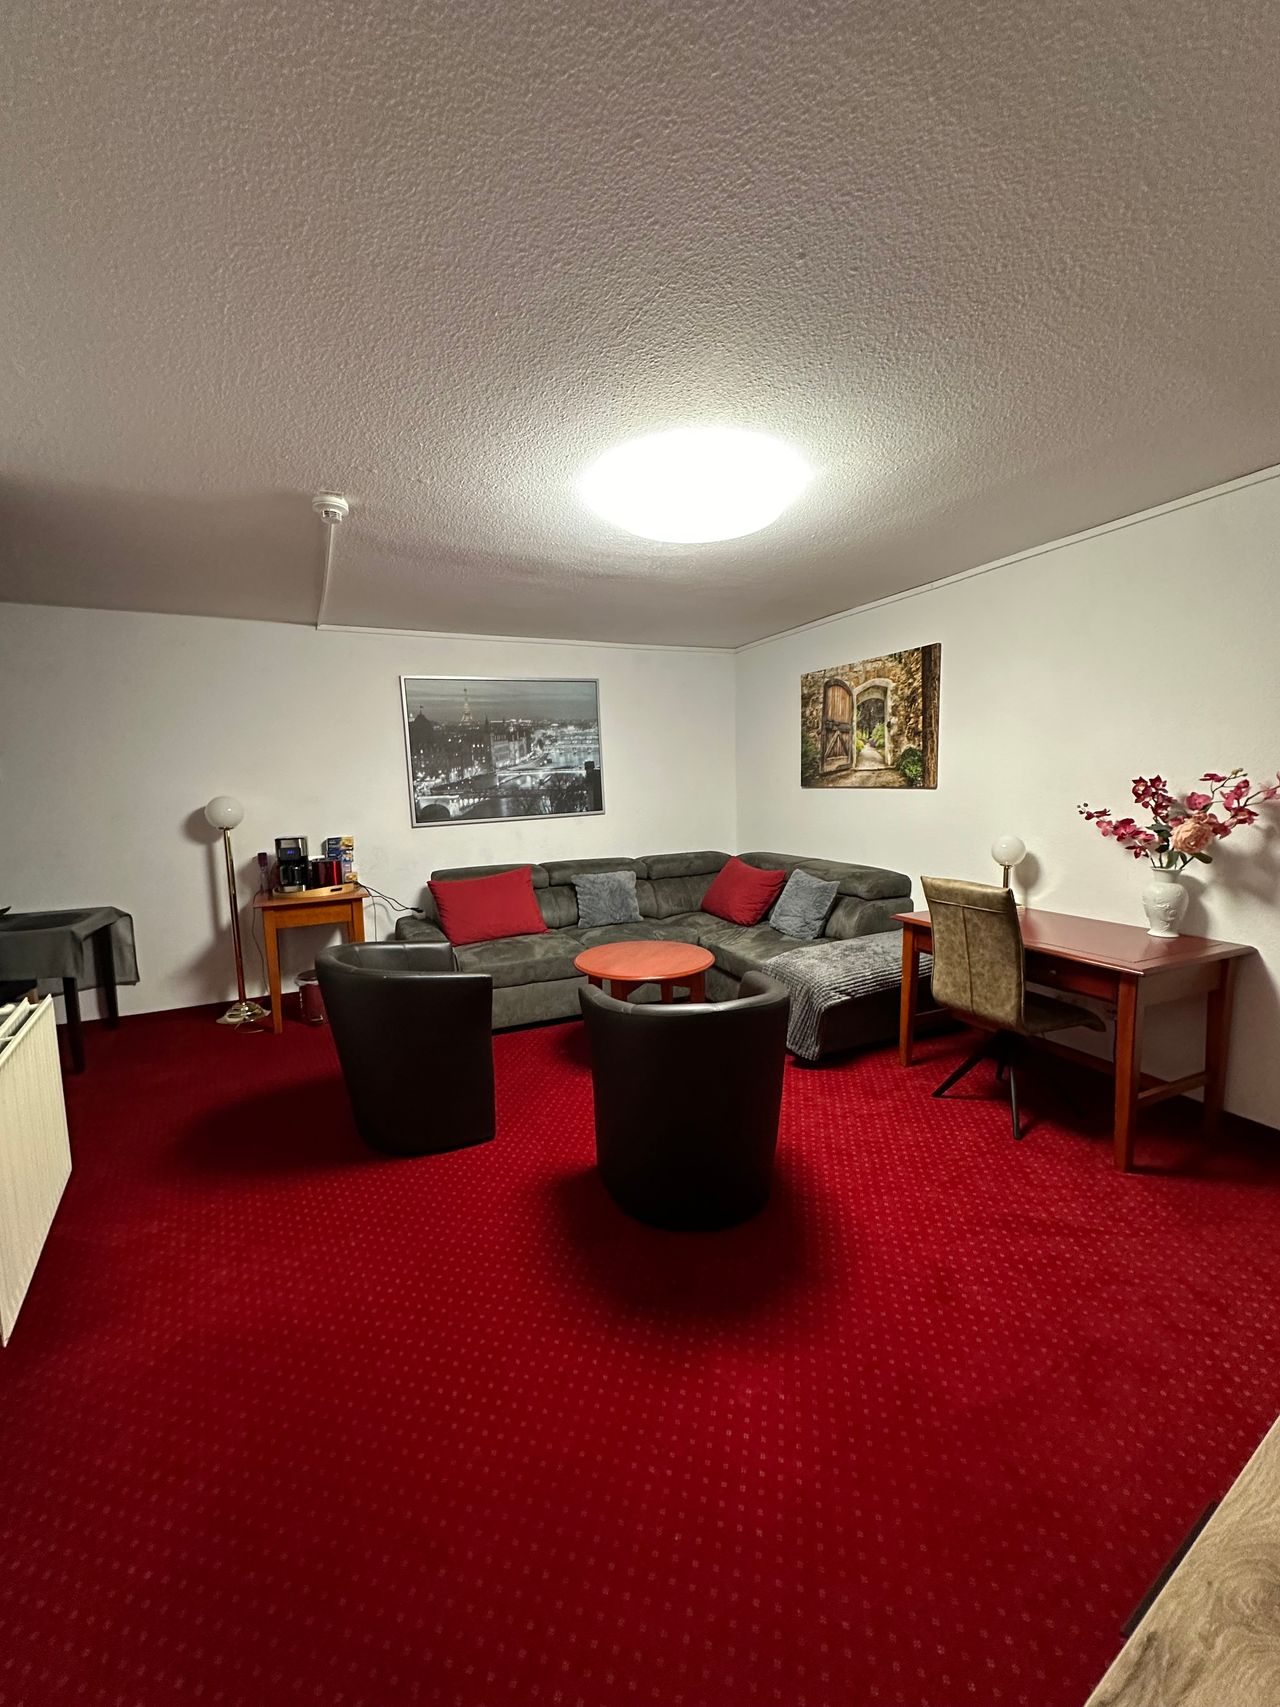 All-inclusive in Nuremberg: Fully furnished apartment in a central location